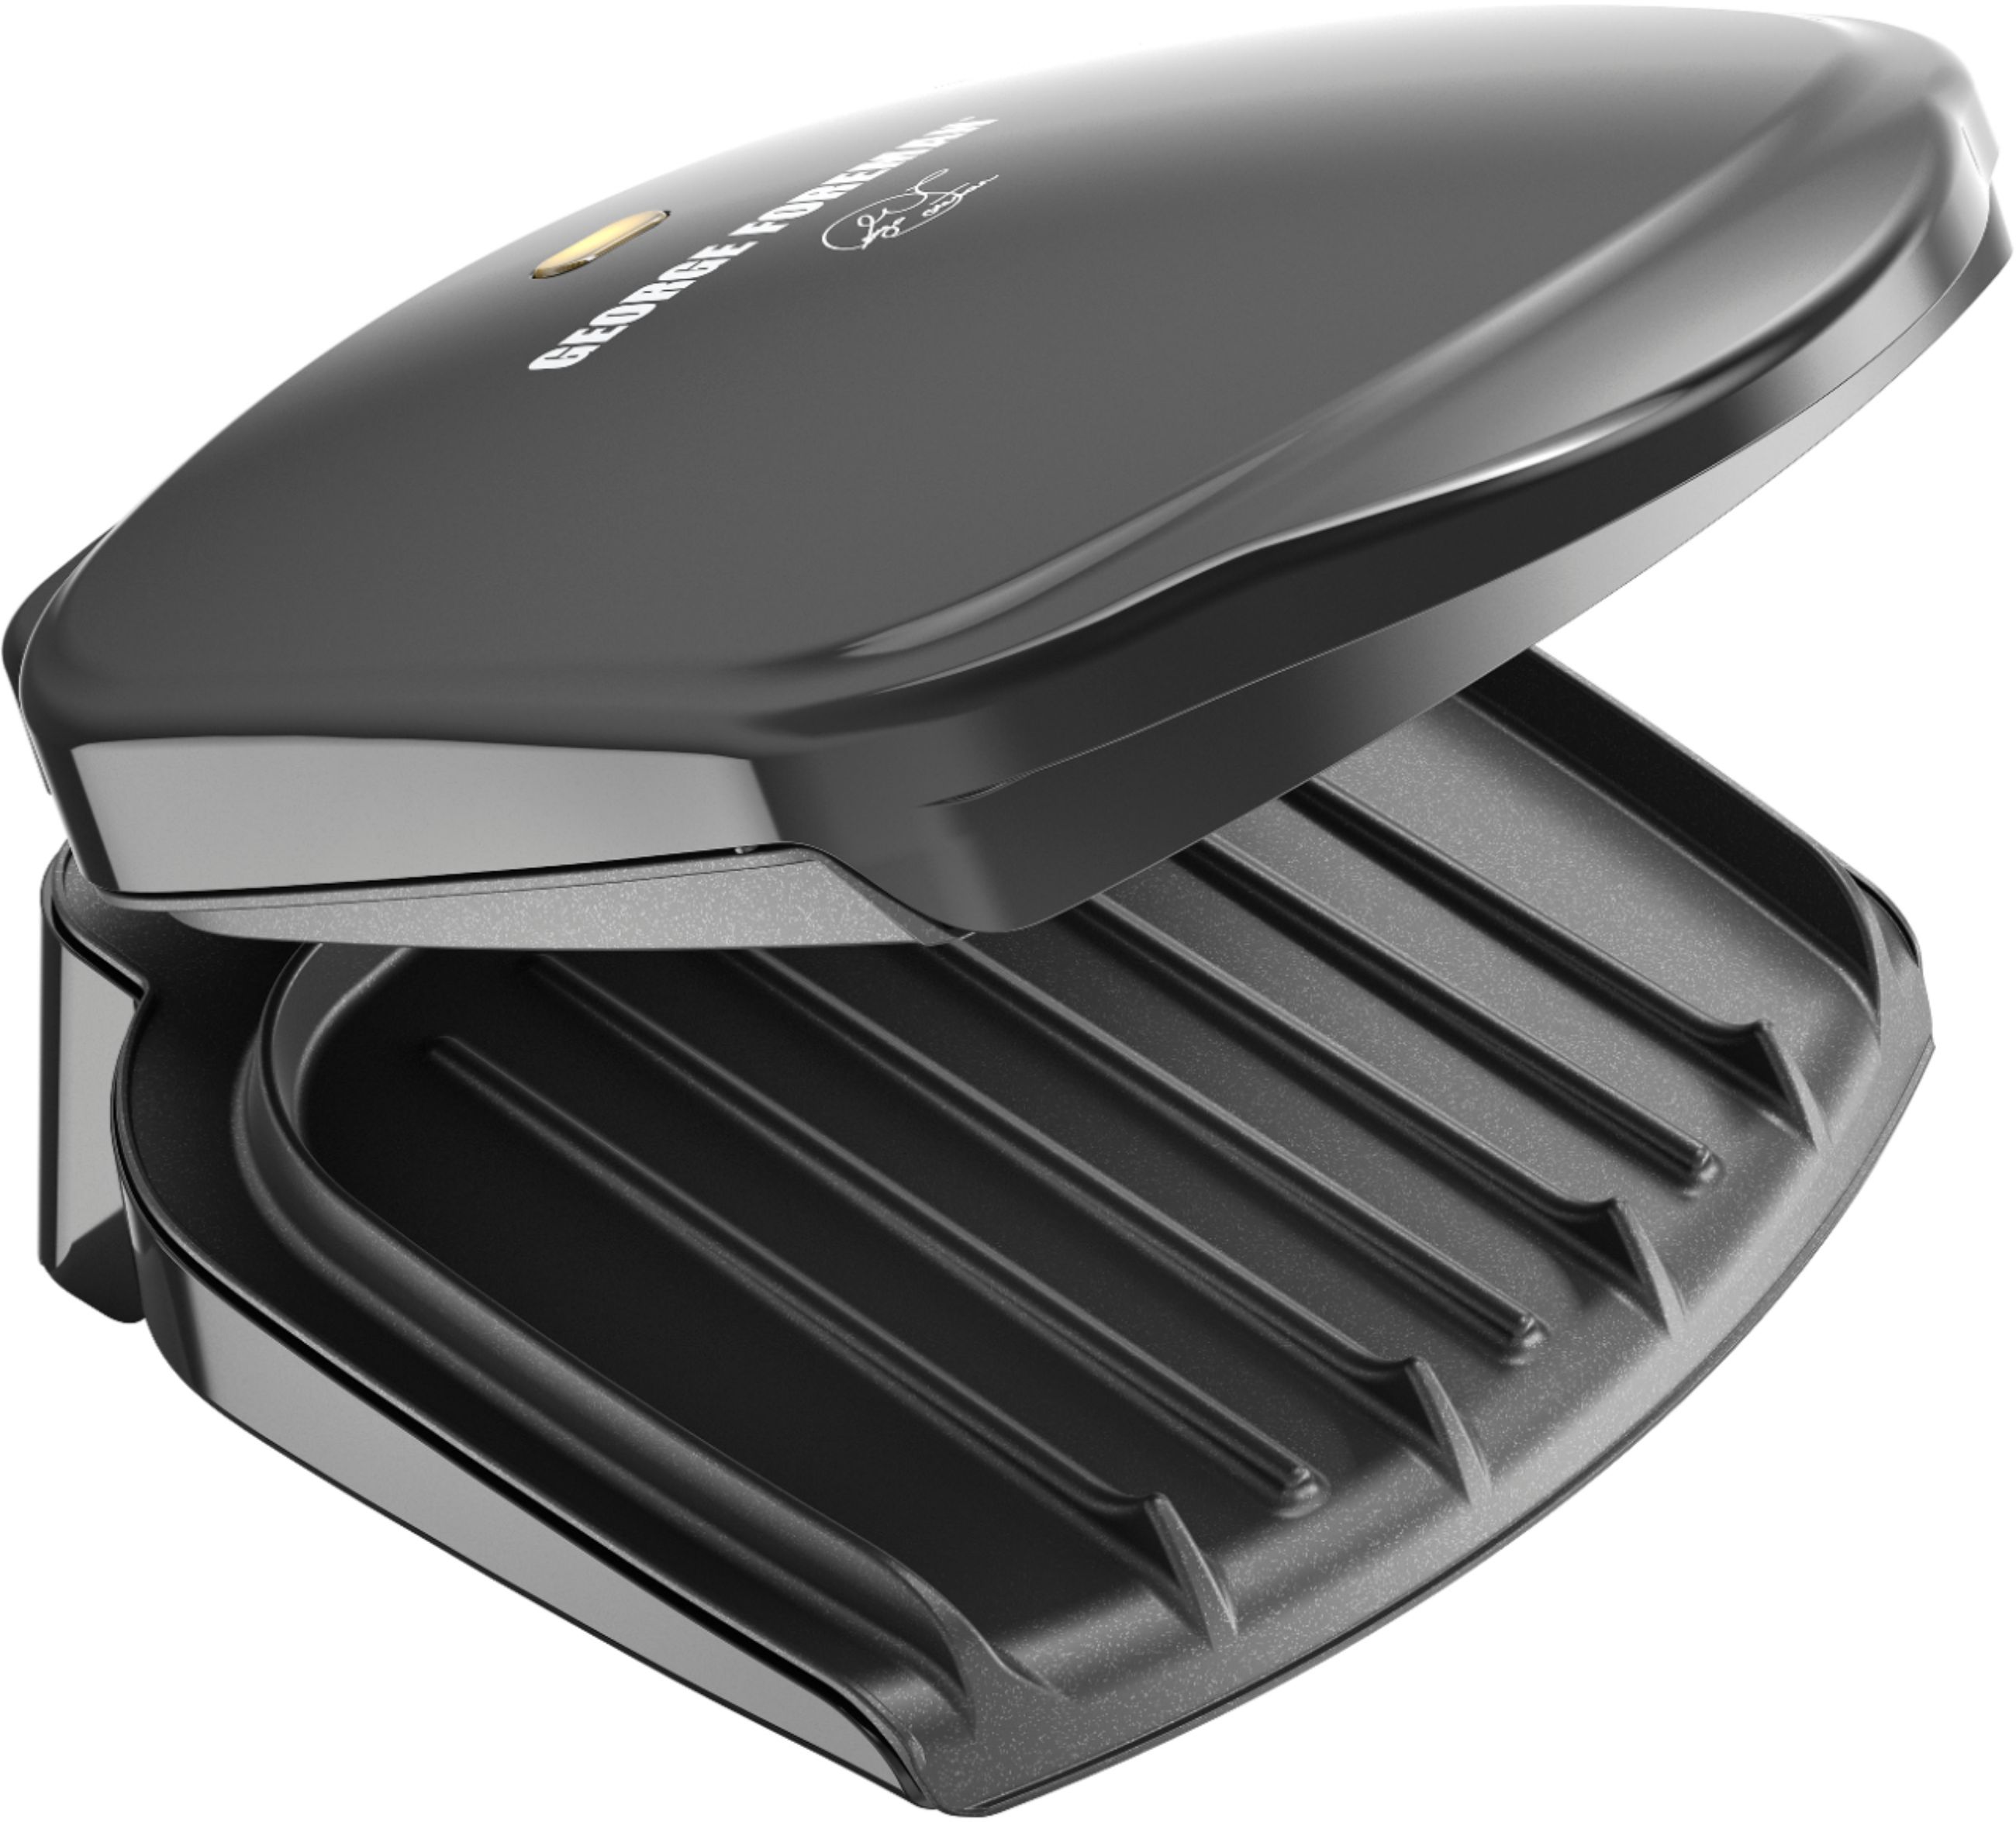 George Foreman grill 2 serving - household items - by owner - housewares  sale - craigslist